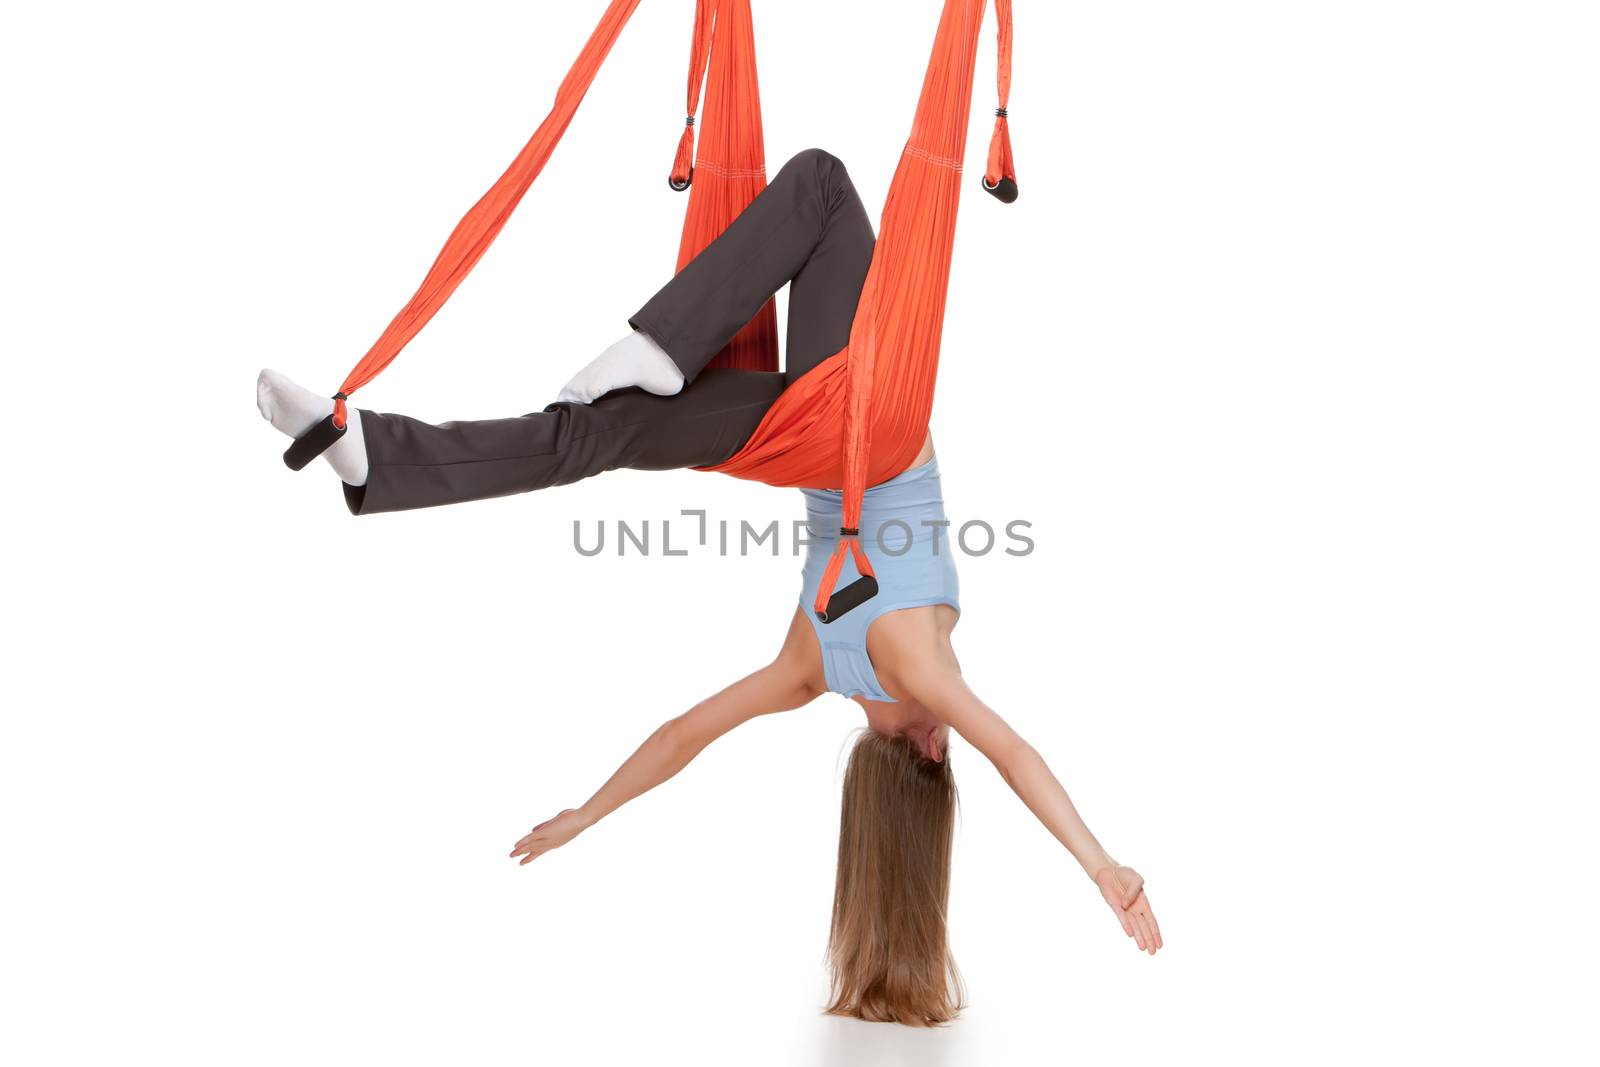 Young woman upside down doing anti-gravity aerial yoga in hammock on a seamless white background.